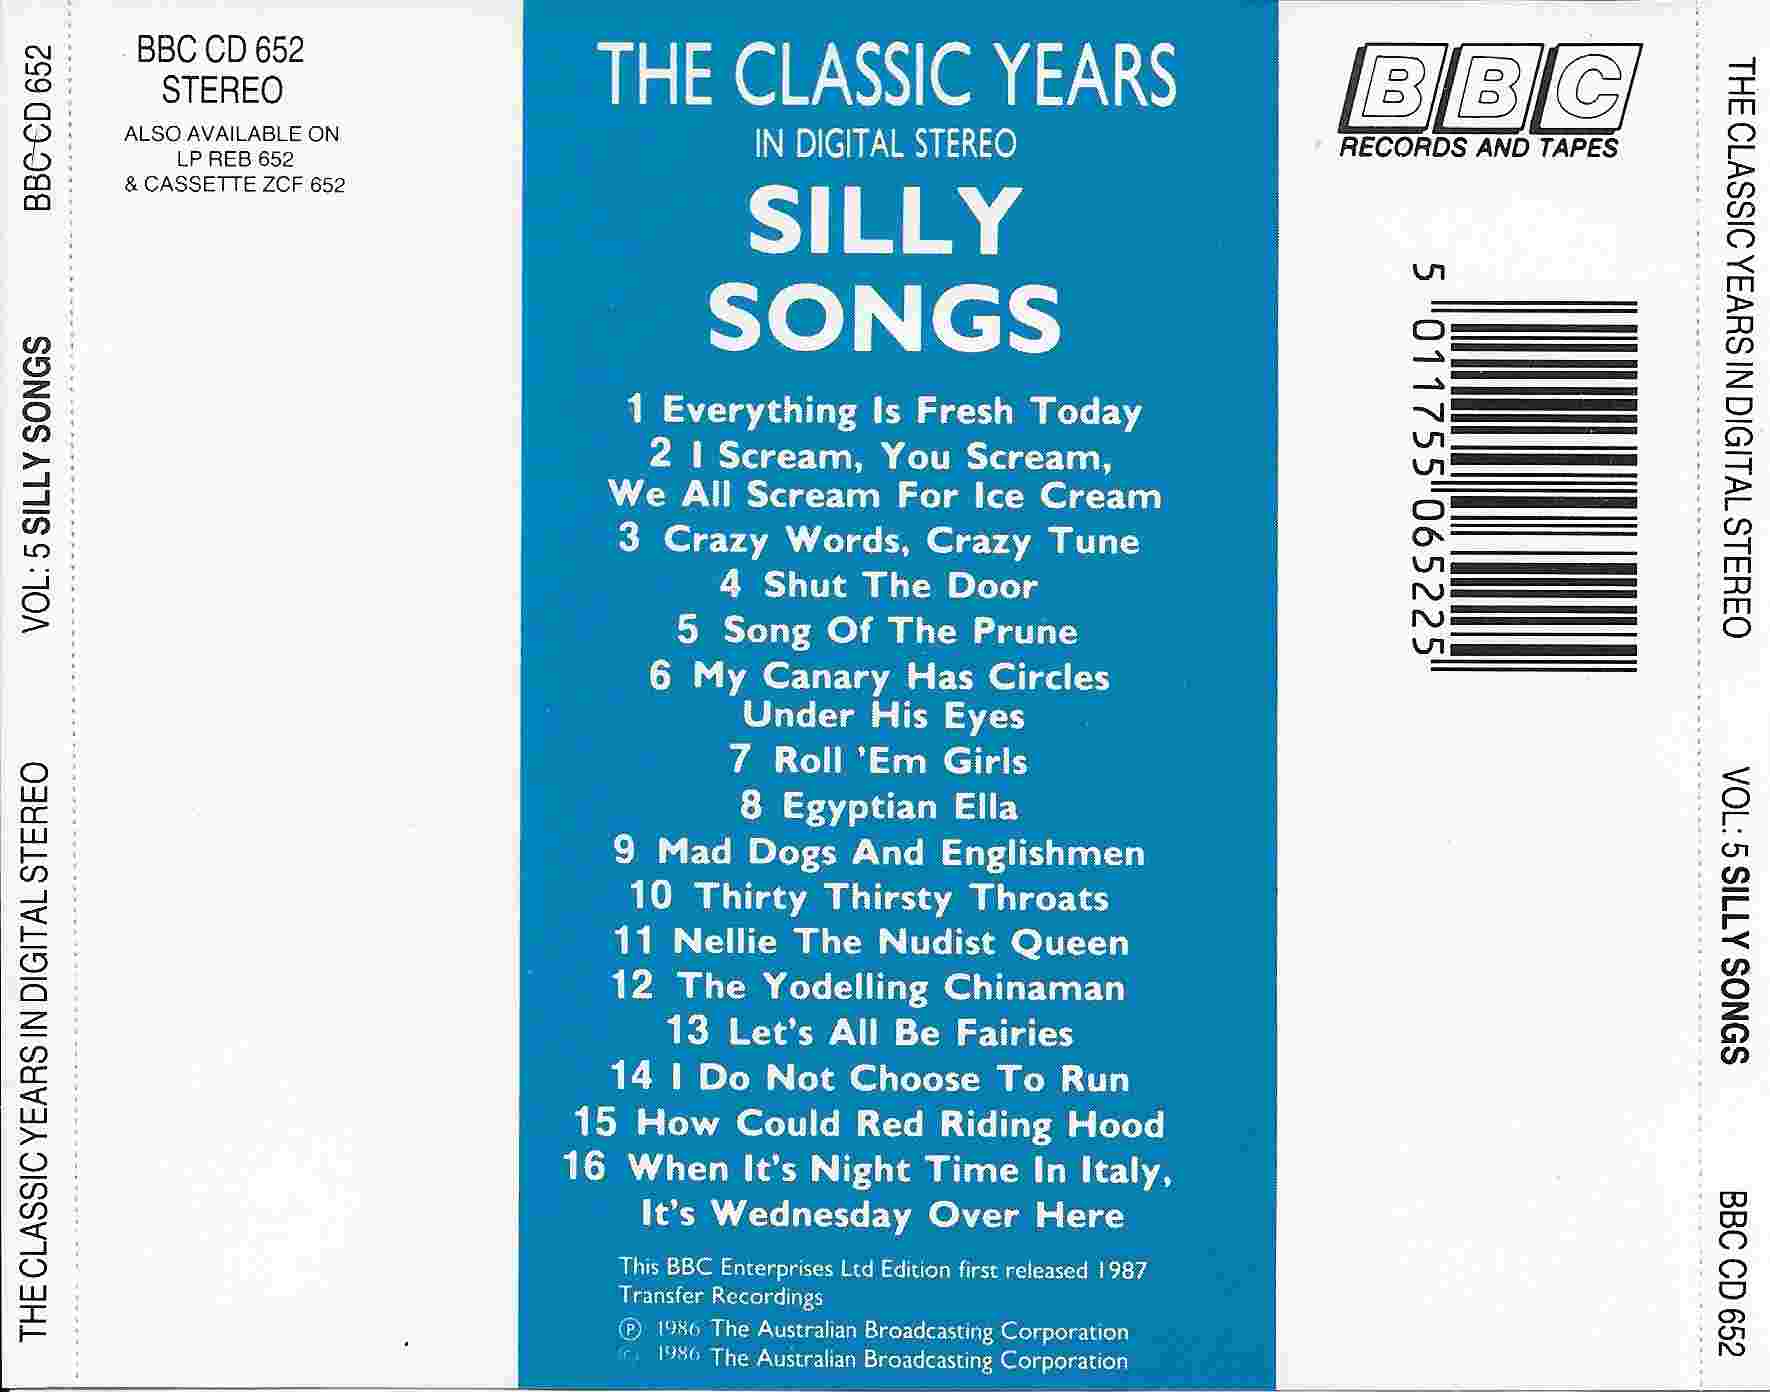 Picture of BBCCD652 Classic years - Volume 5, Silly songs by artist Various from the BBC records and Tapes library